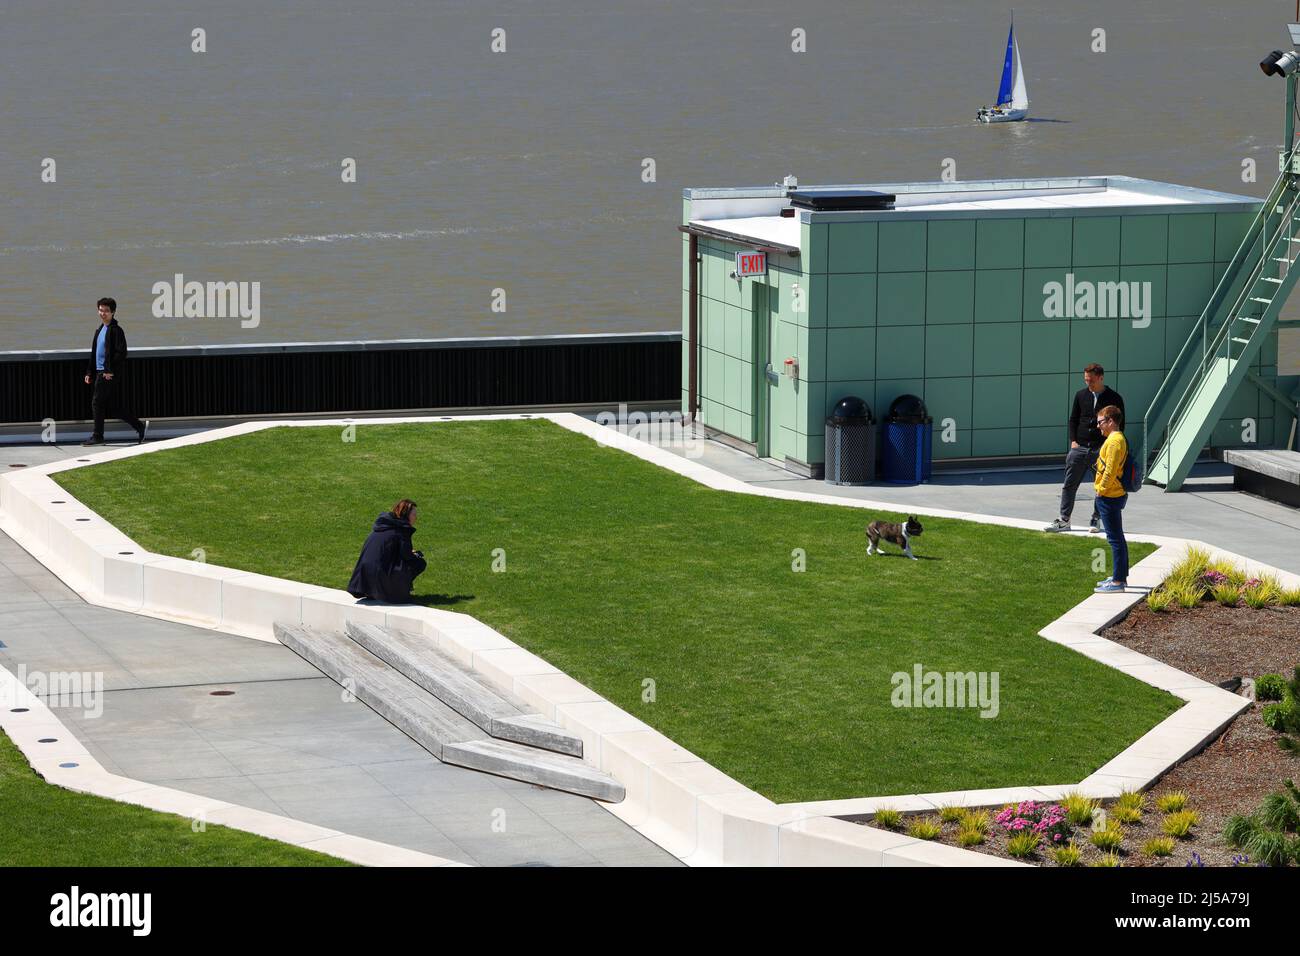 A dog plays on the lawn on top of Pier 57 rooftop park at Hudson River Park in Manhattan; a sailboat sails past on the Hudson River, New York. Stock Photo